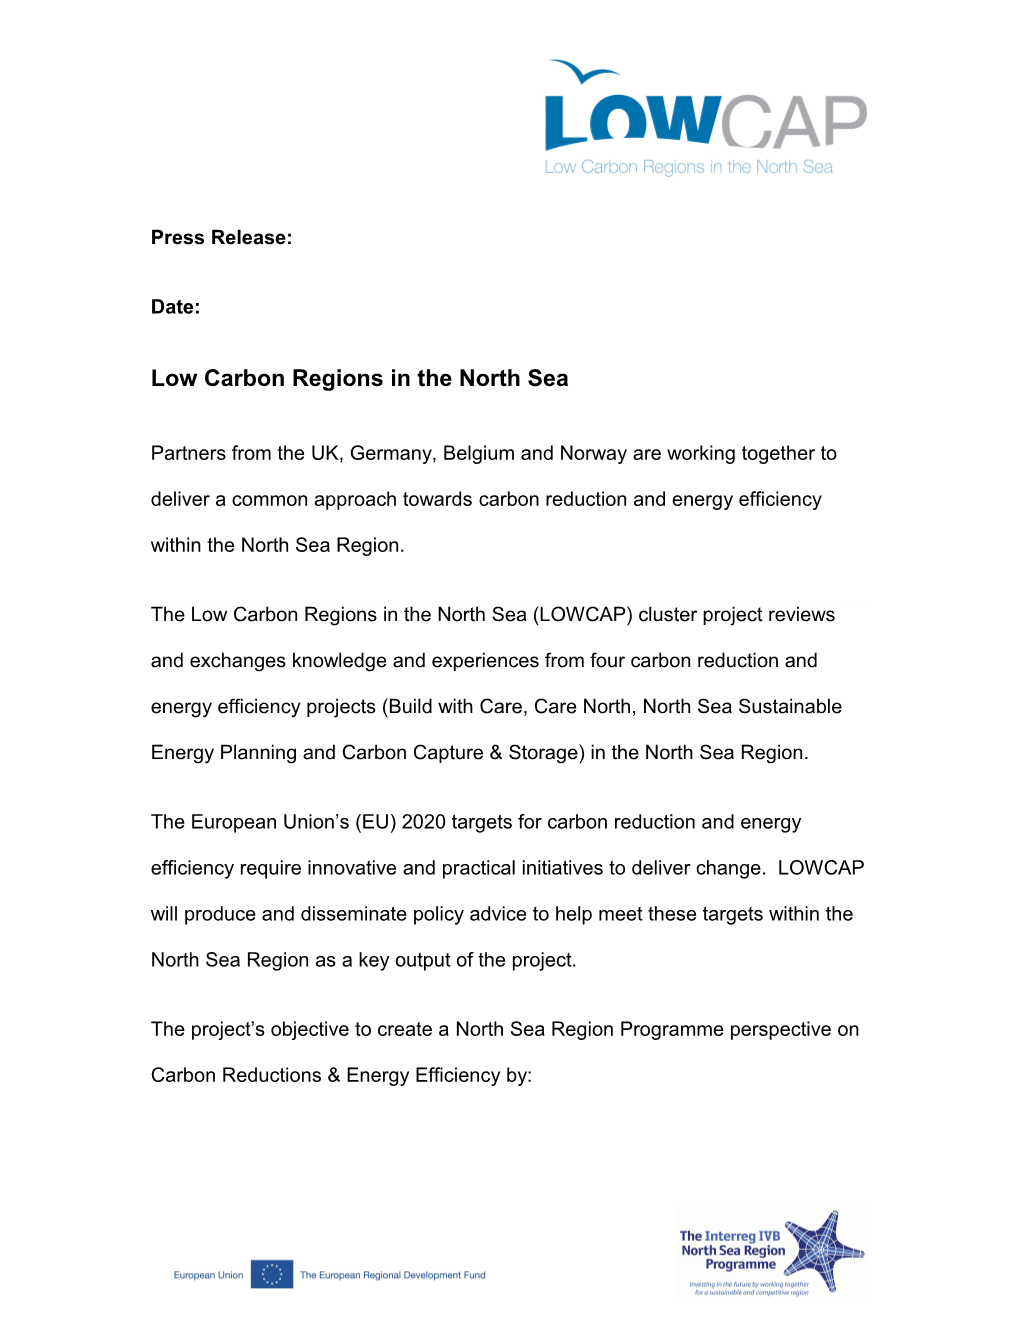 Low Carbon Regions in the North Sea